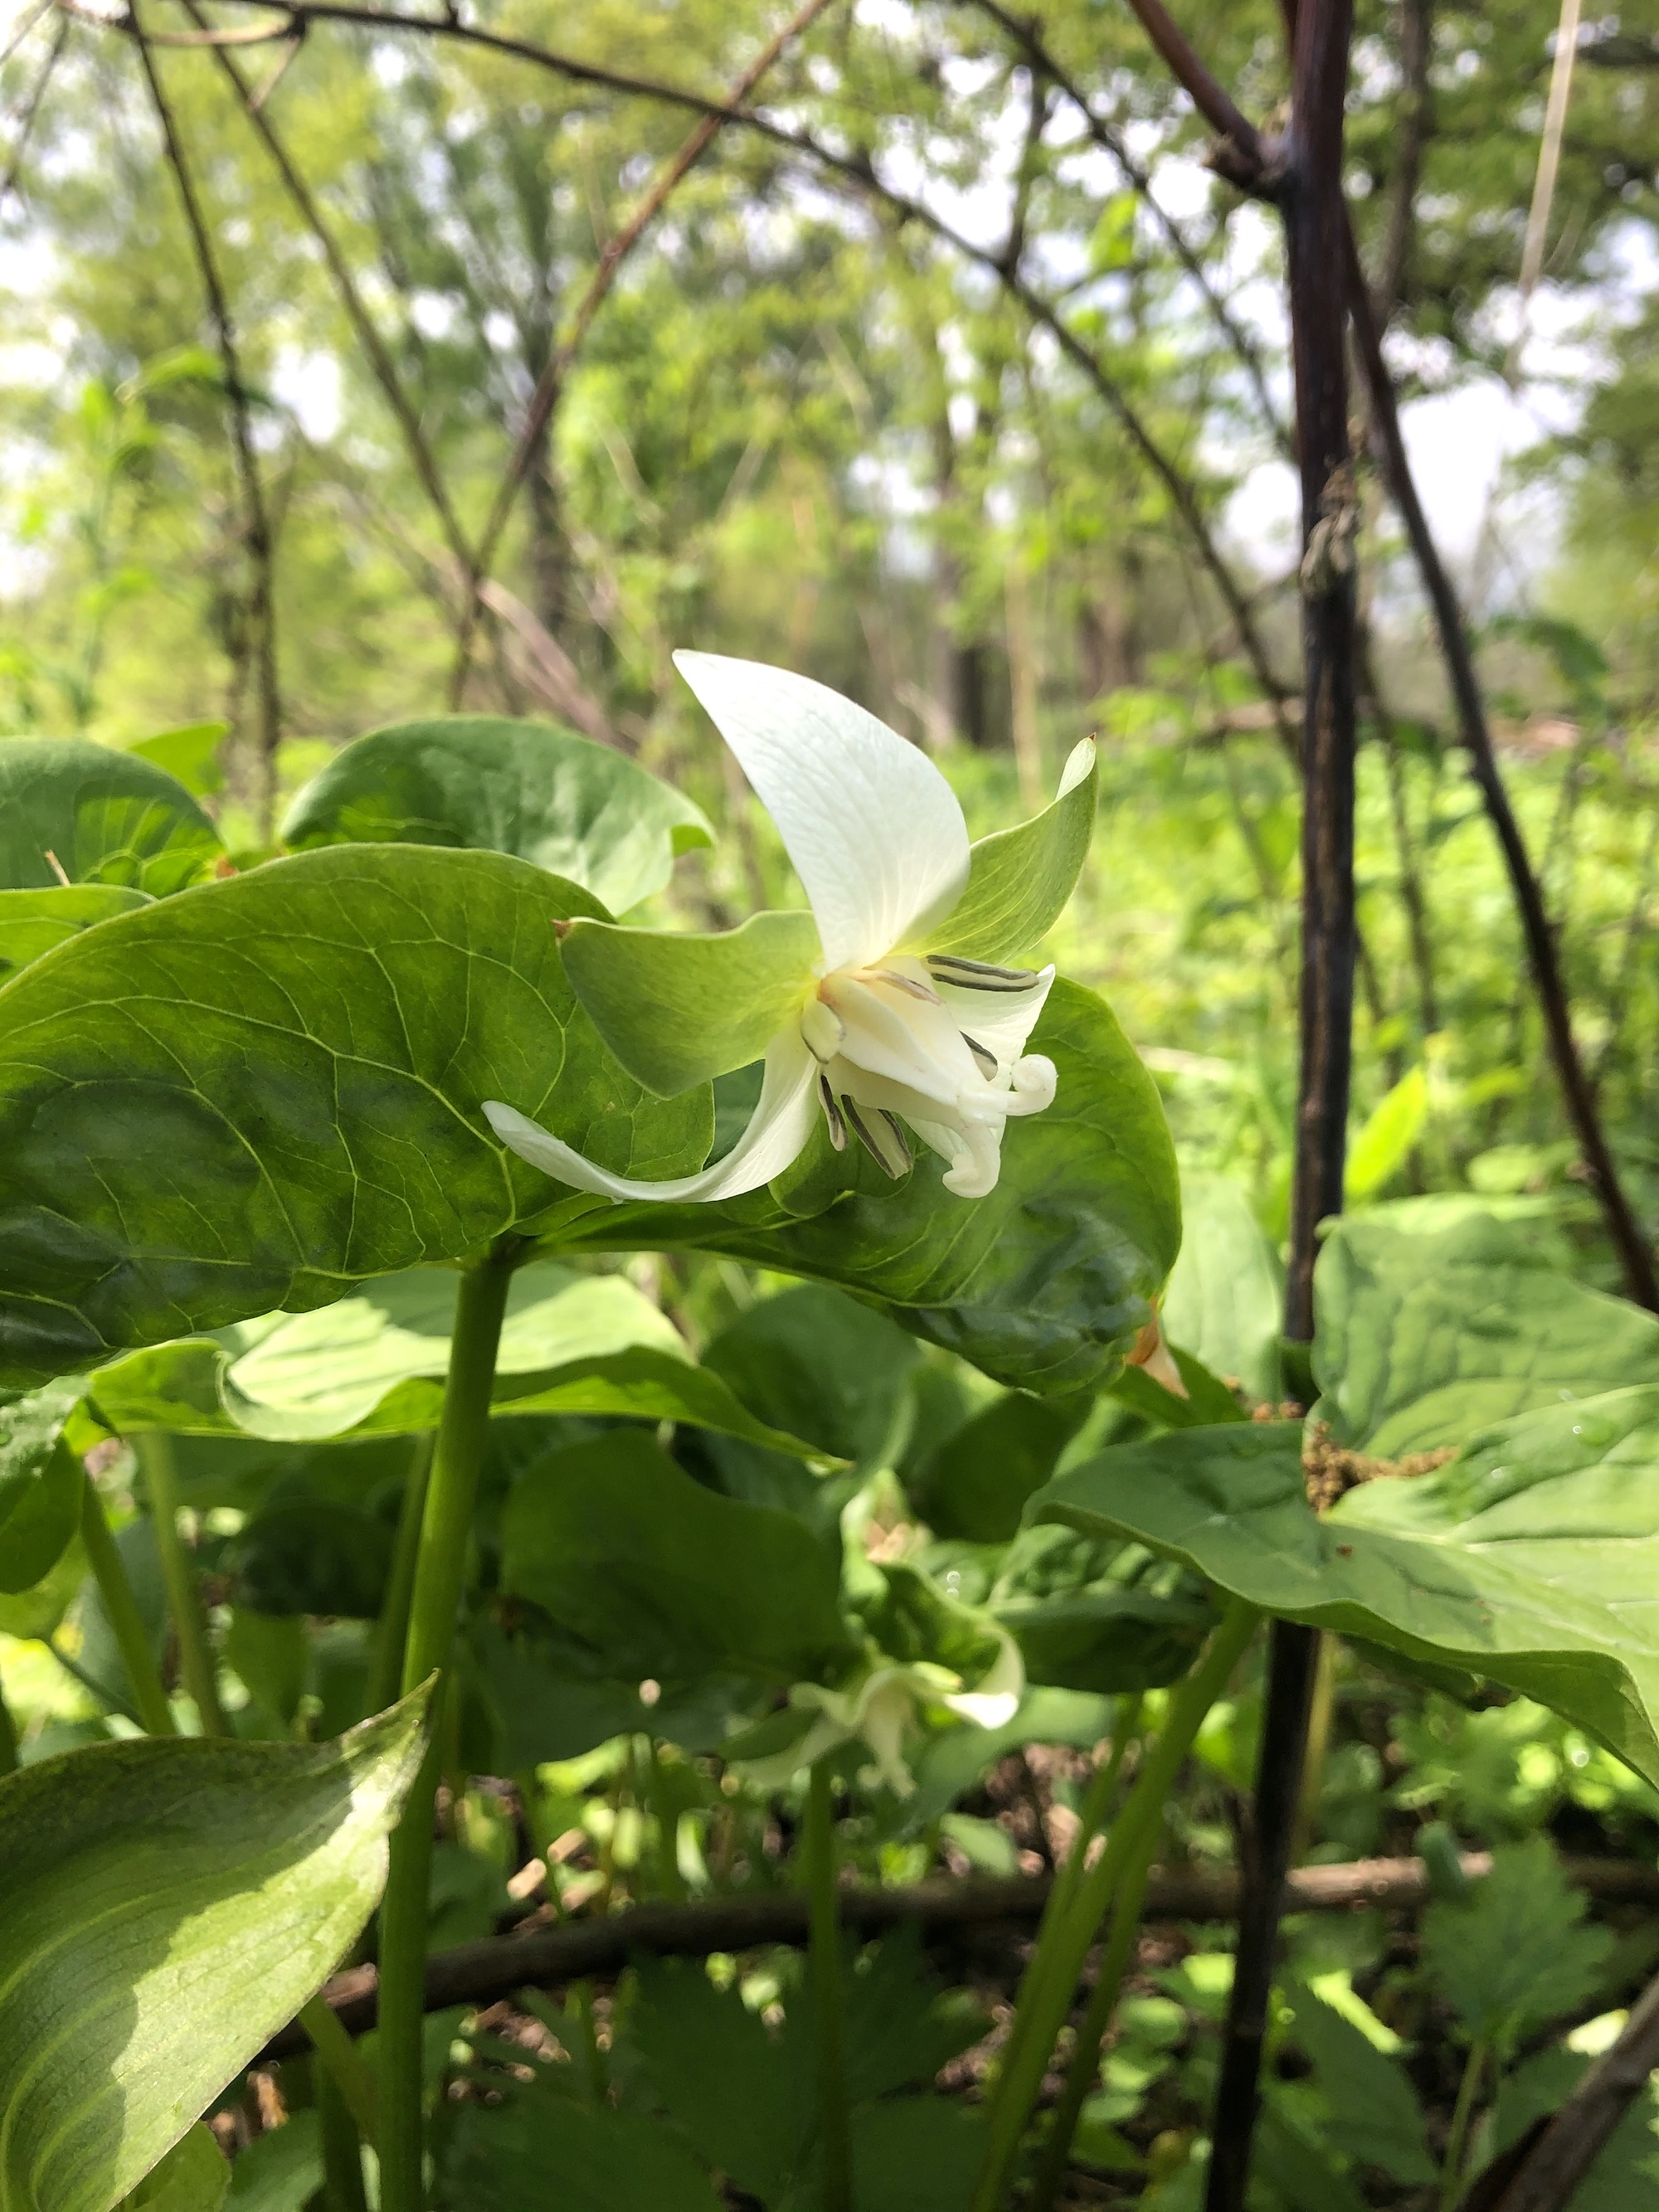 Drooping Trillium near Council Ring Spring in Madison, Wisconsin on May 16, 2021.